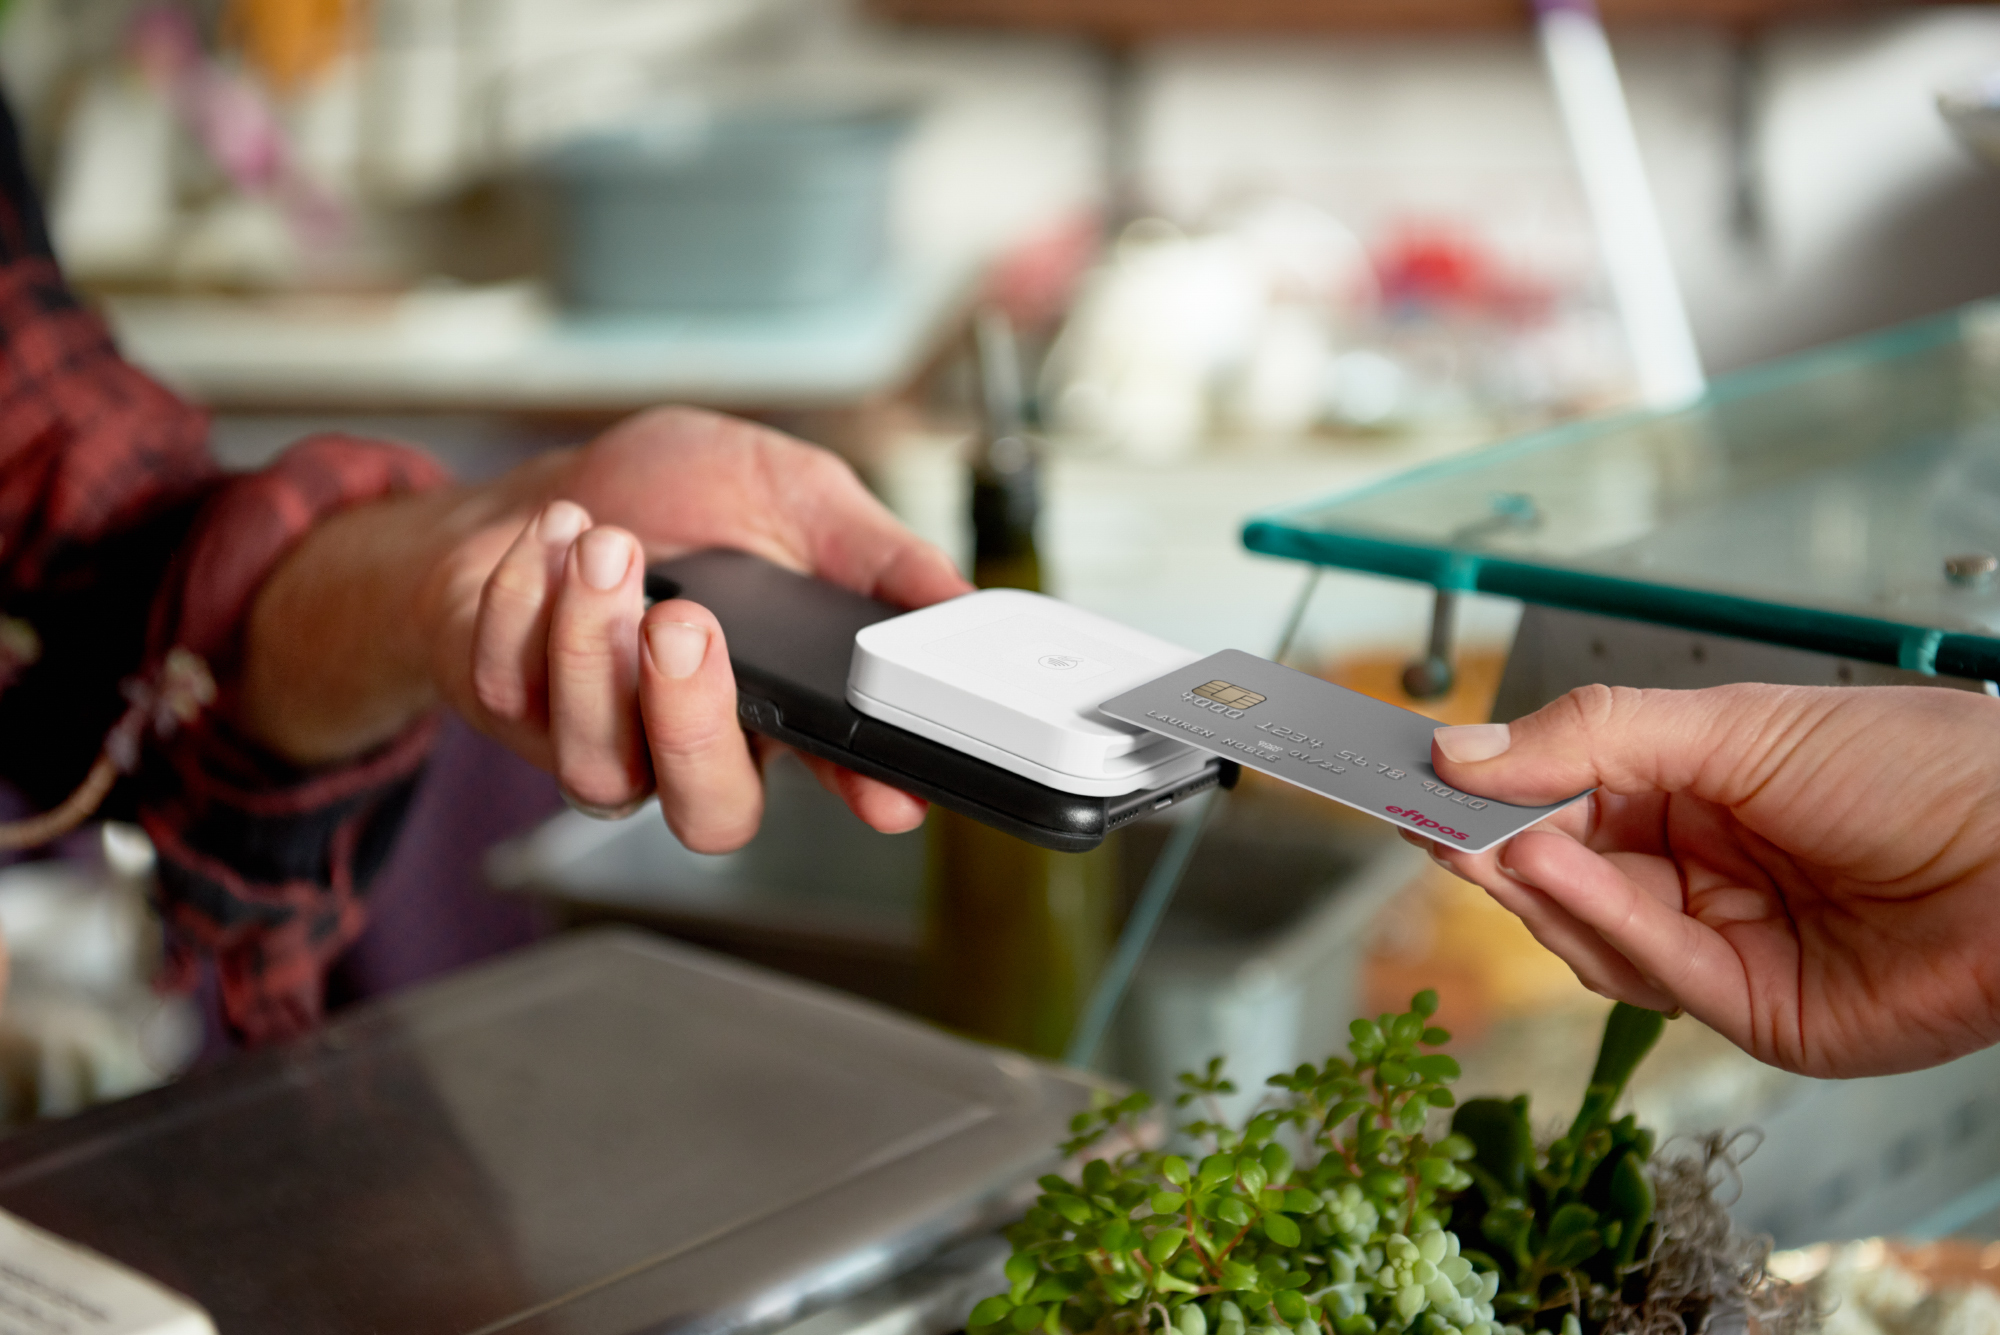 Card payment - Square